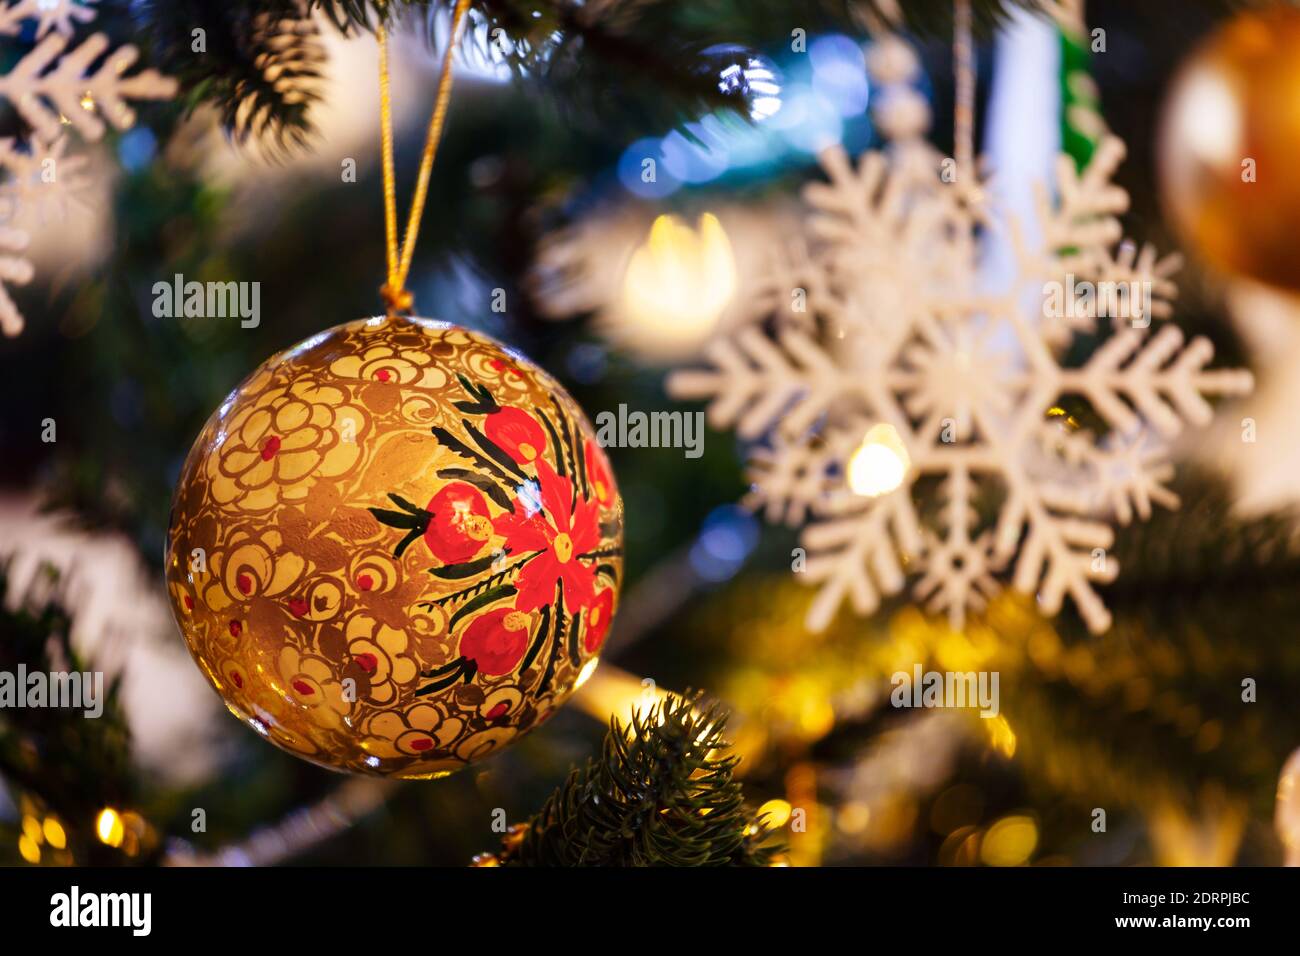 Golden christmas bauble hanging on a Christmas tree, with lights and decorations in the background. Stock Photo